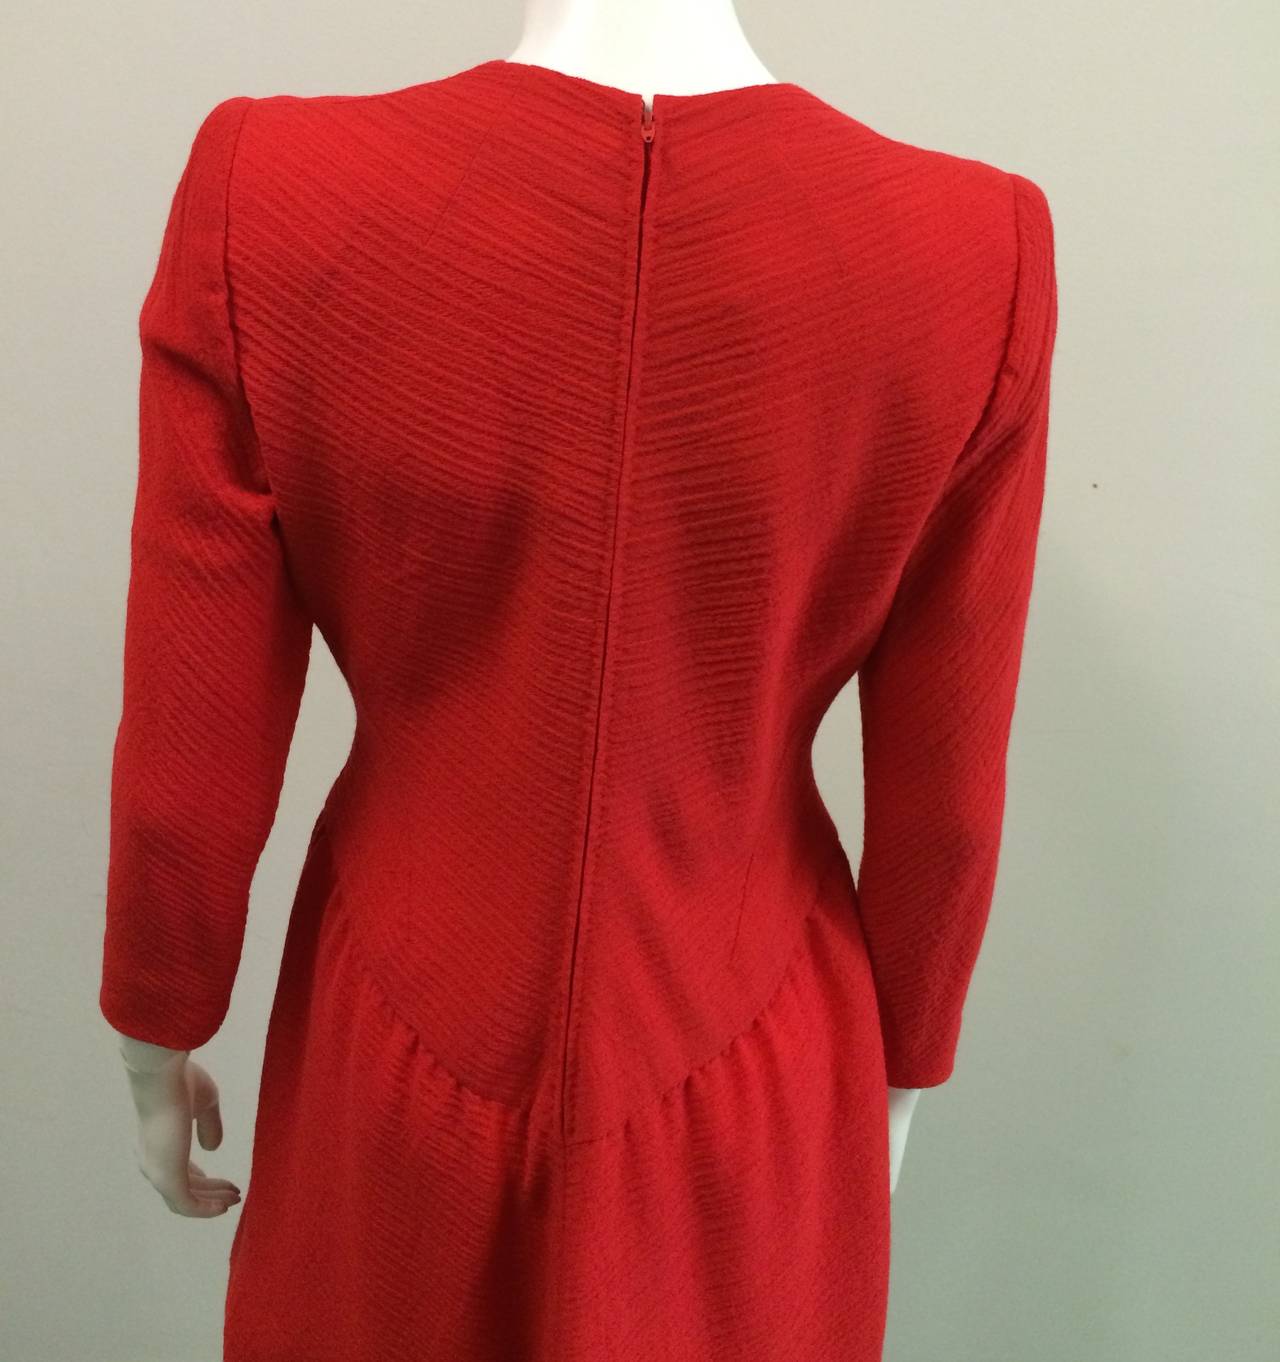 Pauline Trigere for Bergdorf Goodman 1980s Red Wool Dress Size 6. For Sale 2